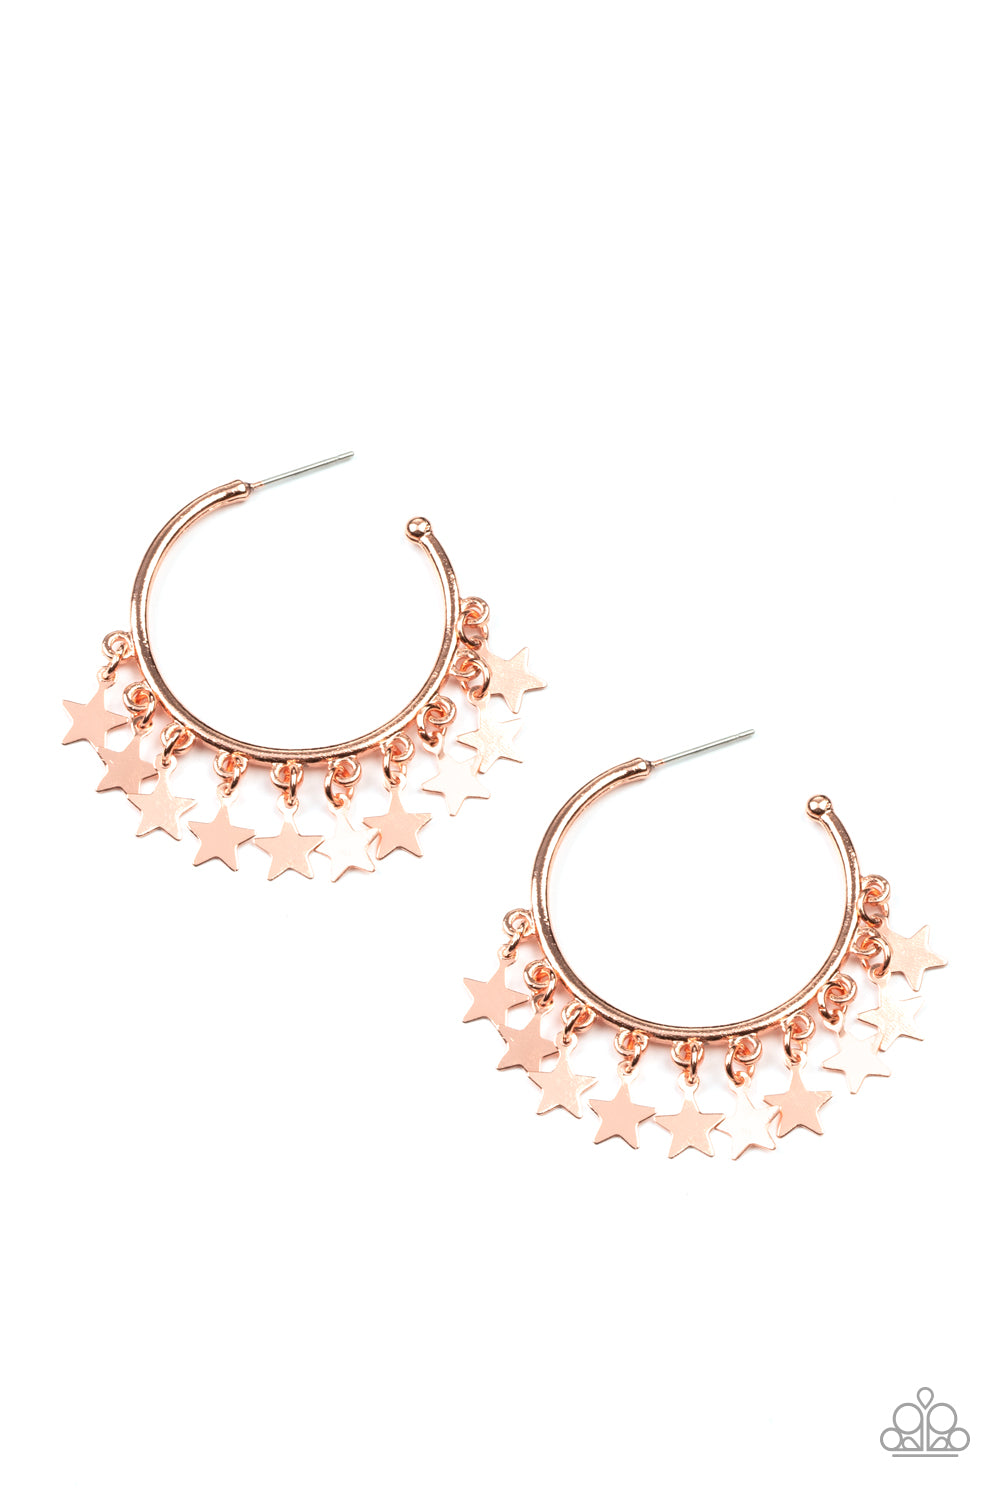 Paparazzi Accessories - Happy Independence Day - Copper Earrings. Bling By Titia Boutique